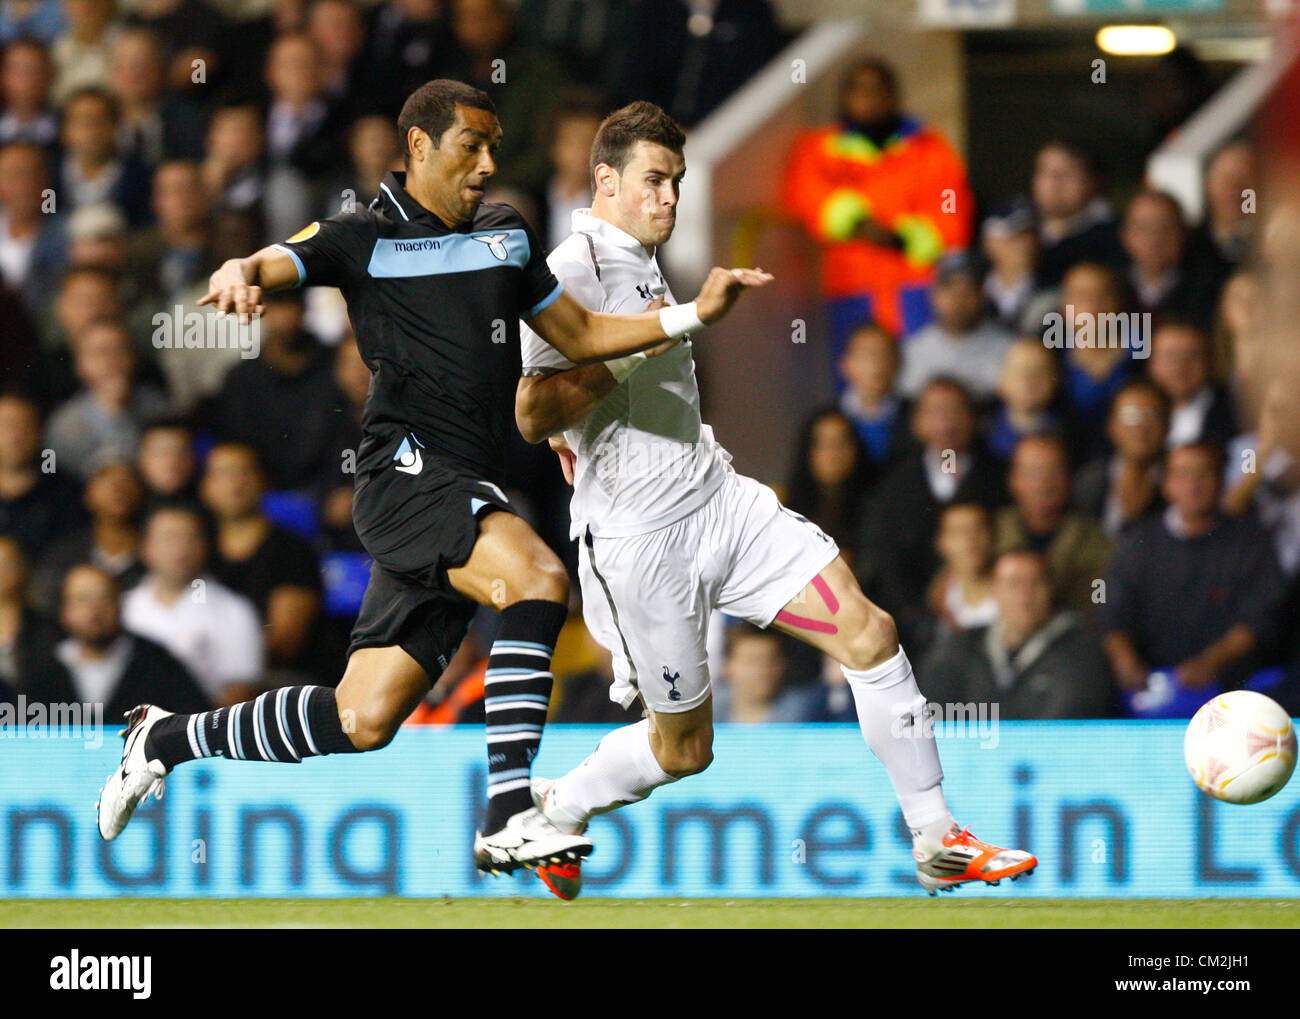 20.09.2012 London, ENGLAND:  Gareth Bale of Tottenham Hotspur and Andre Dias of S.S. Lazio in action during the Europa League Group J match between Tottenham Hotspur and SS Lazio at White Hart Lane Stadium Stock Photo